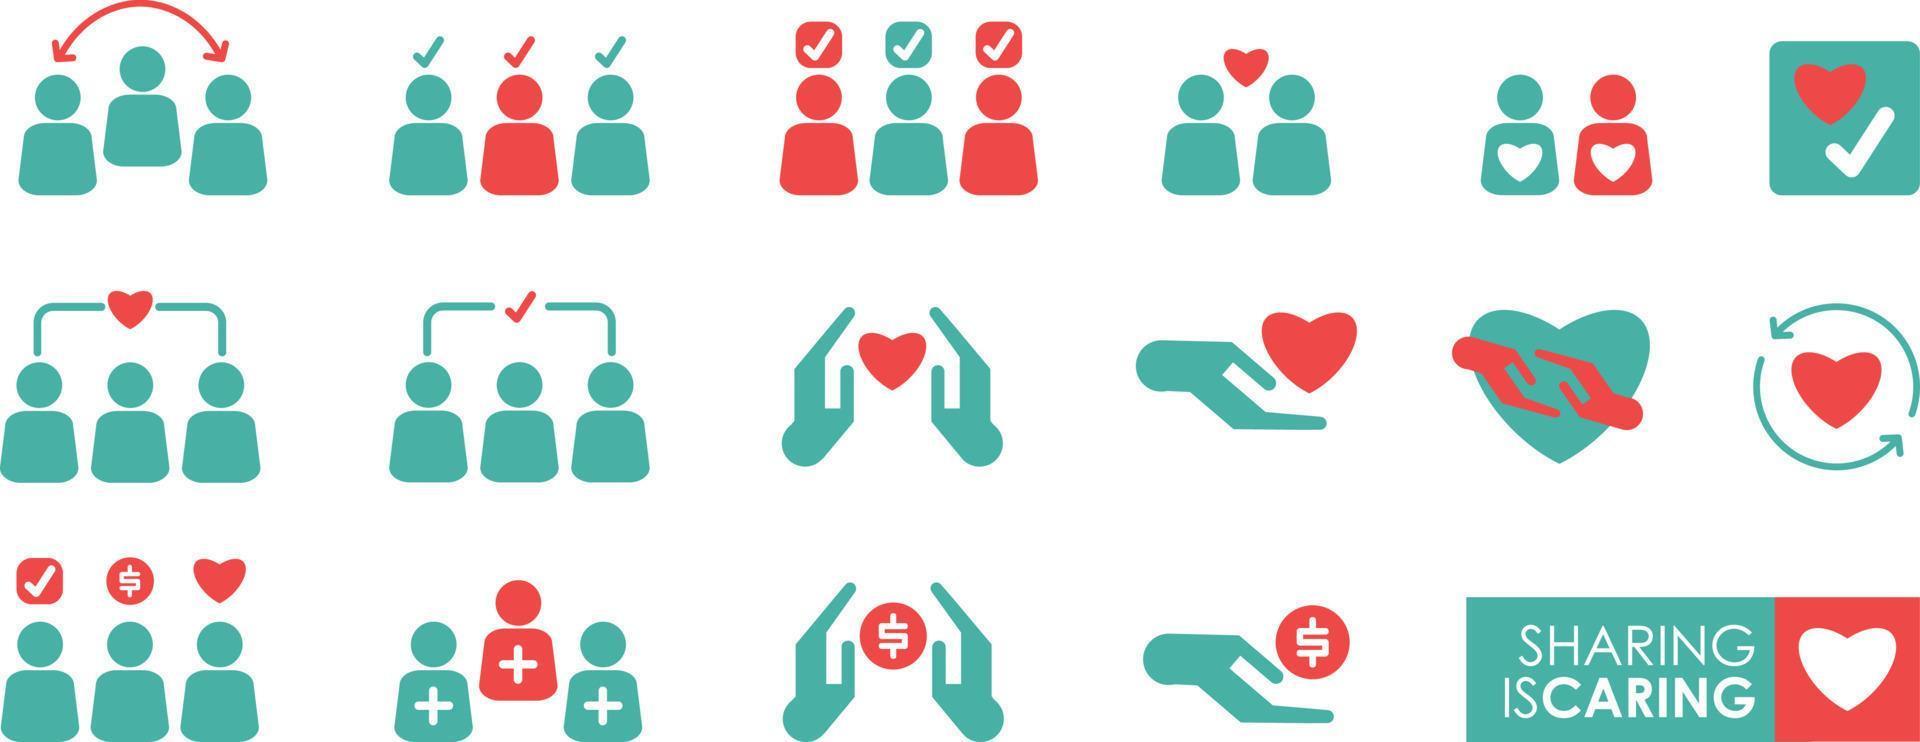 sharing is caring icon Silhouette, Included icons such as kind, care, help, share, good, support, and more. vector